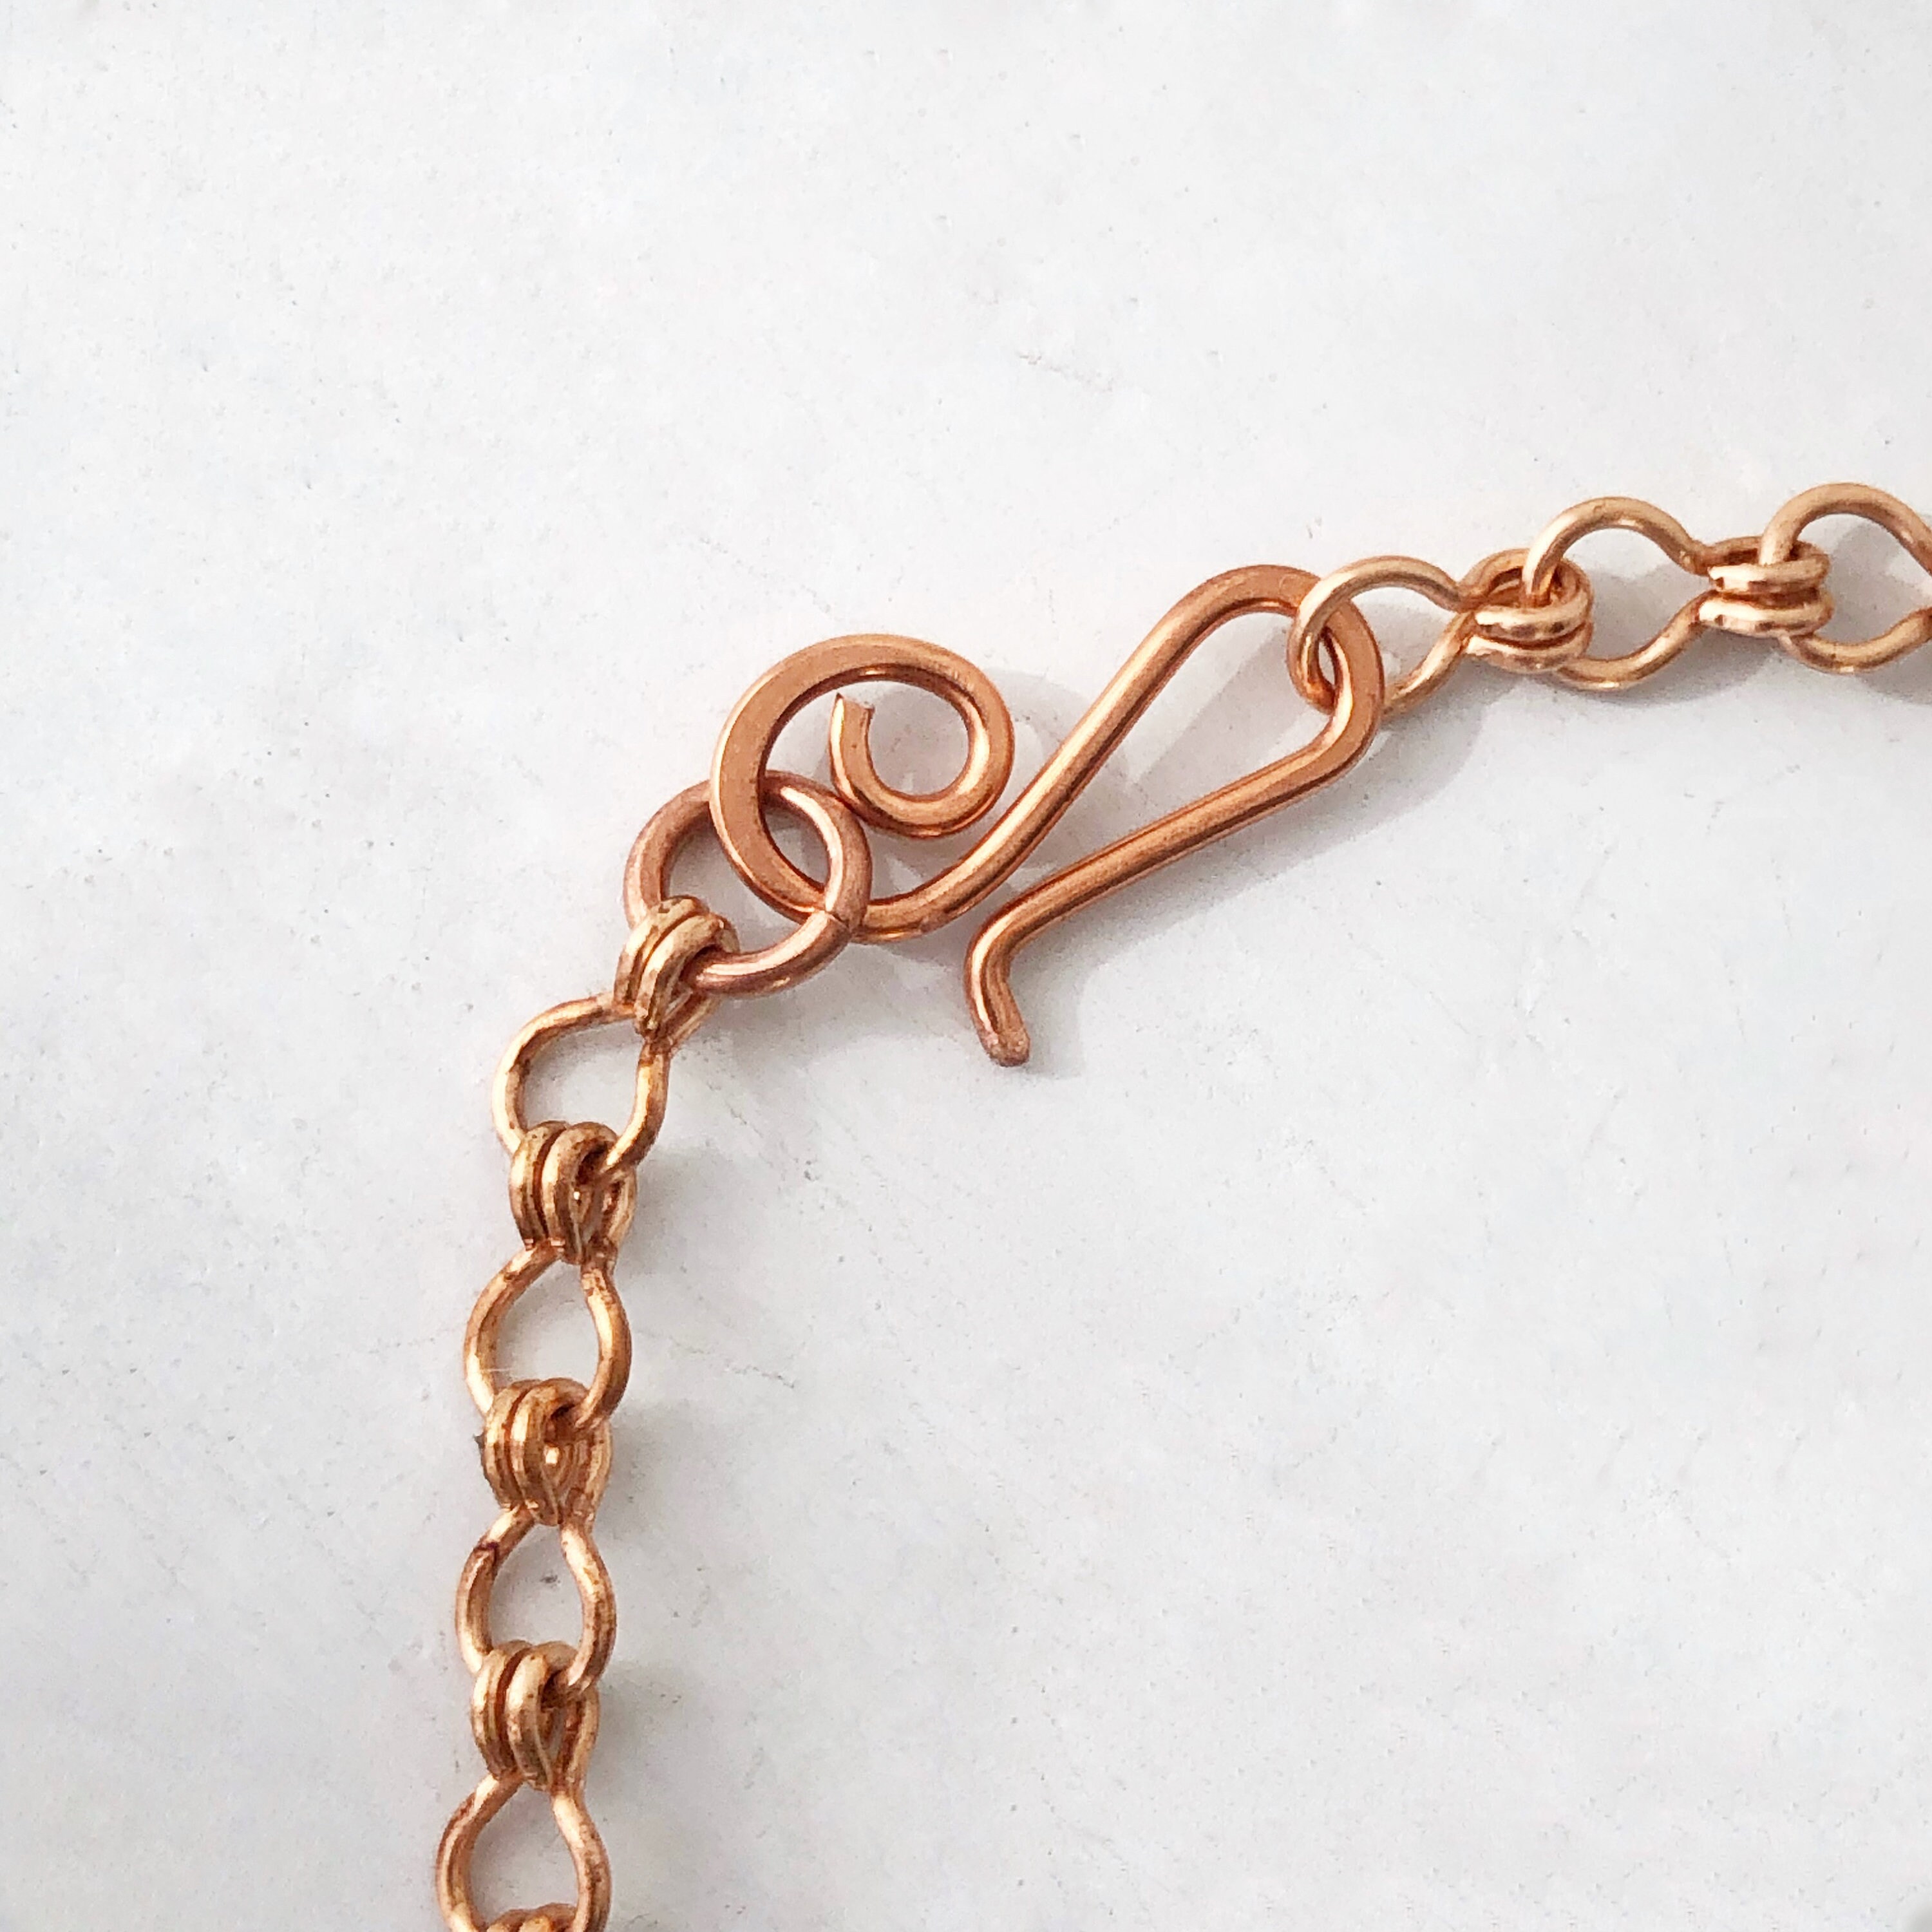 Handmade adjustable copper chain for pendant, wire wrapped links